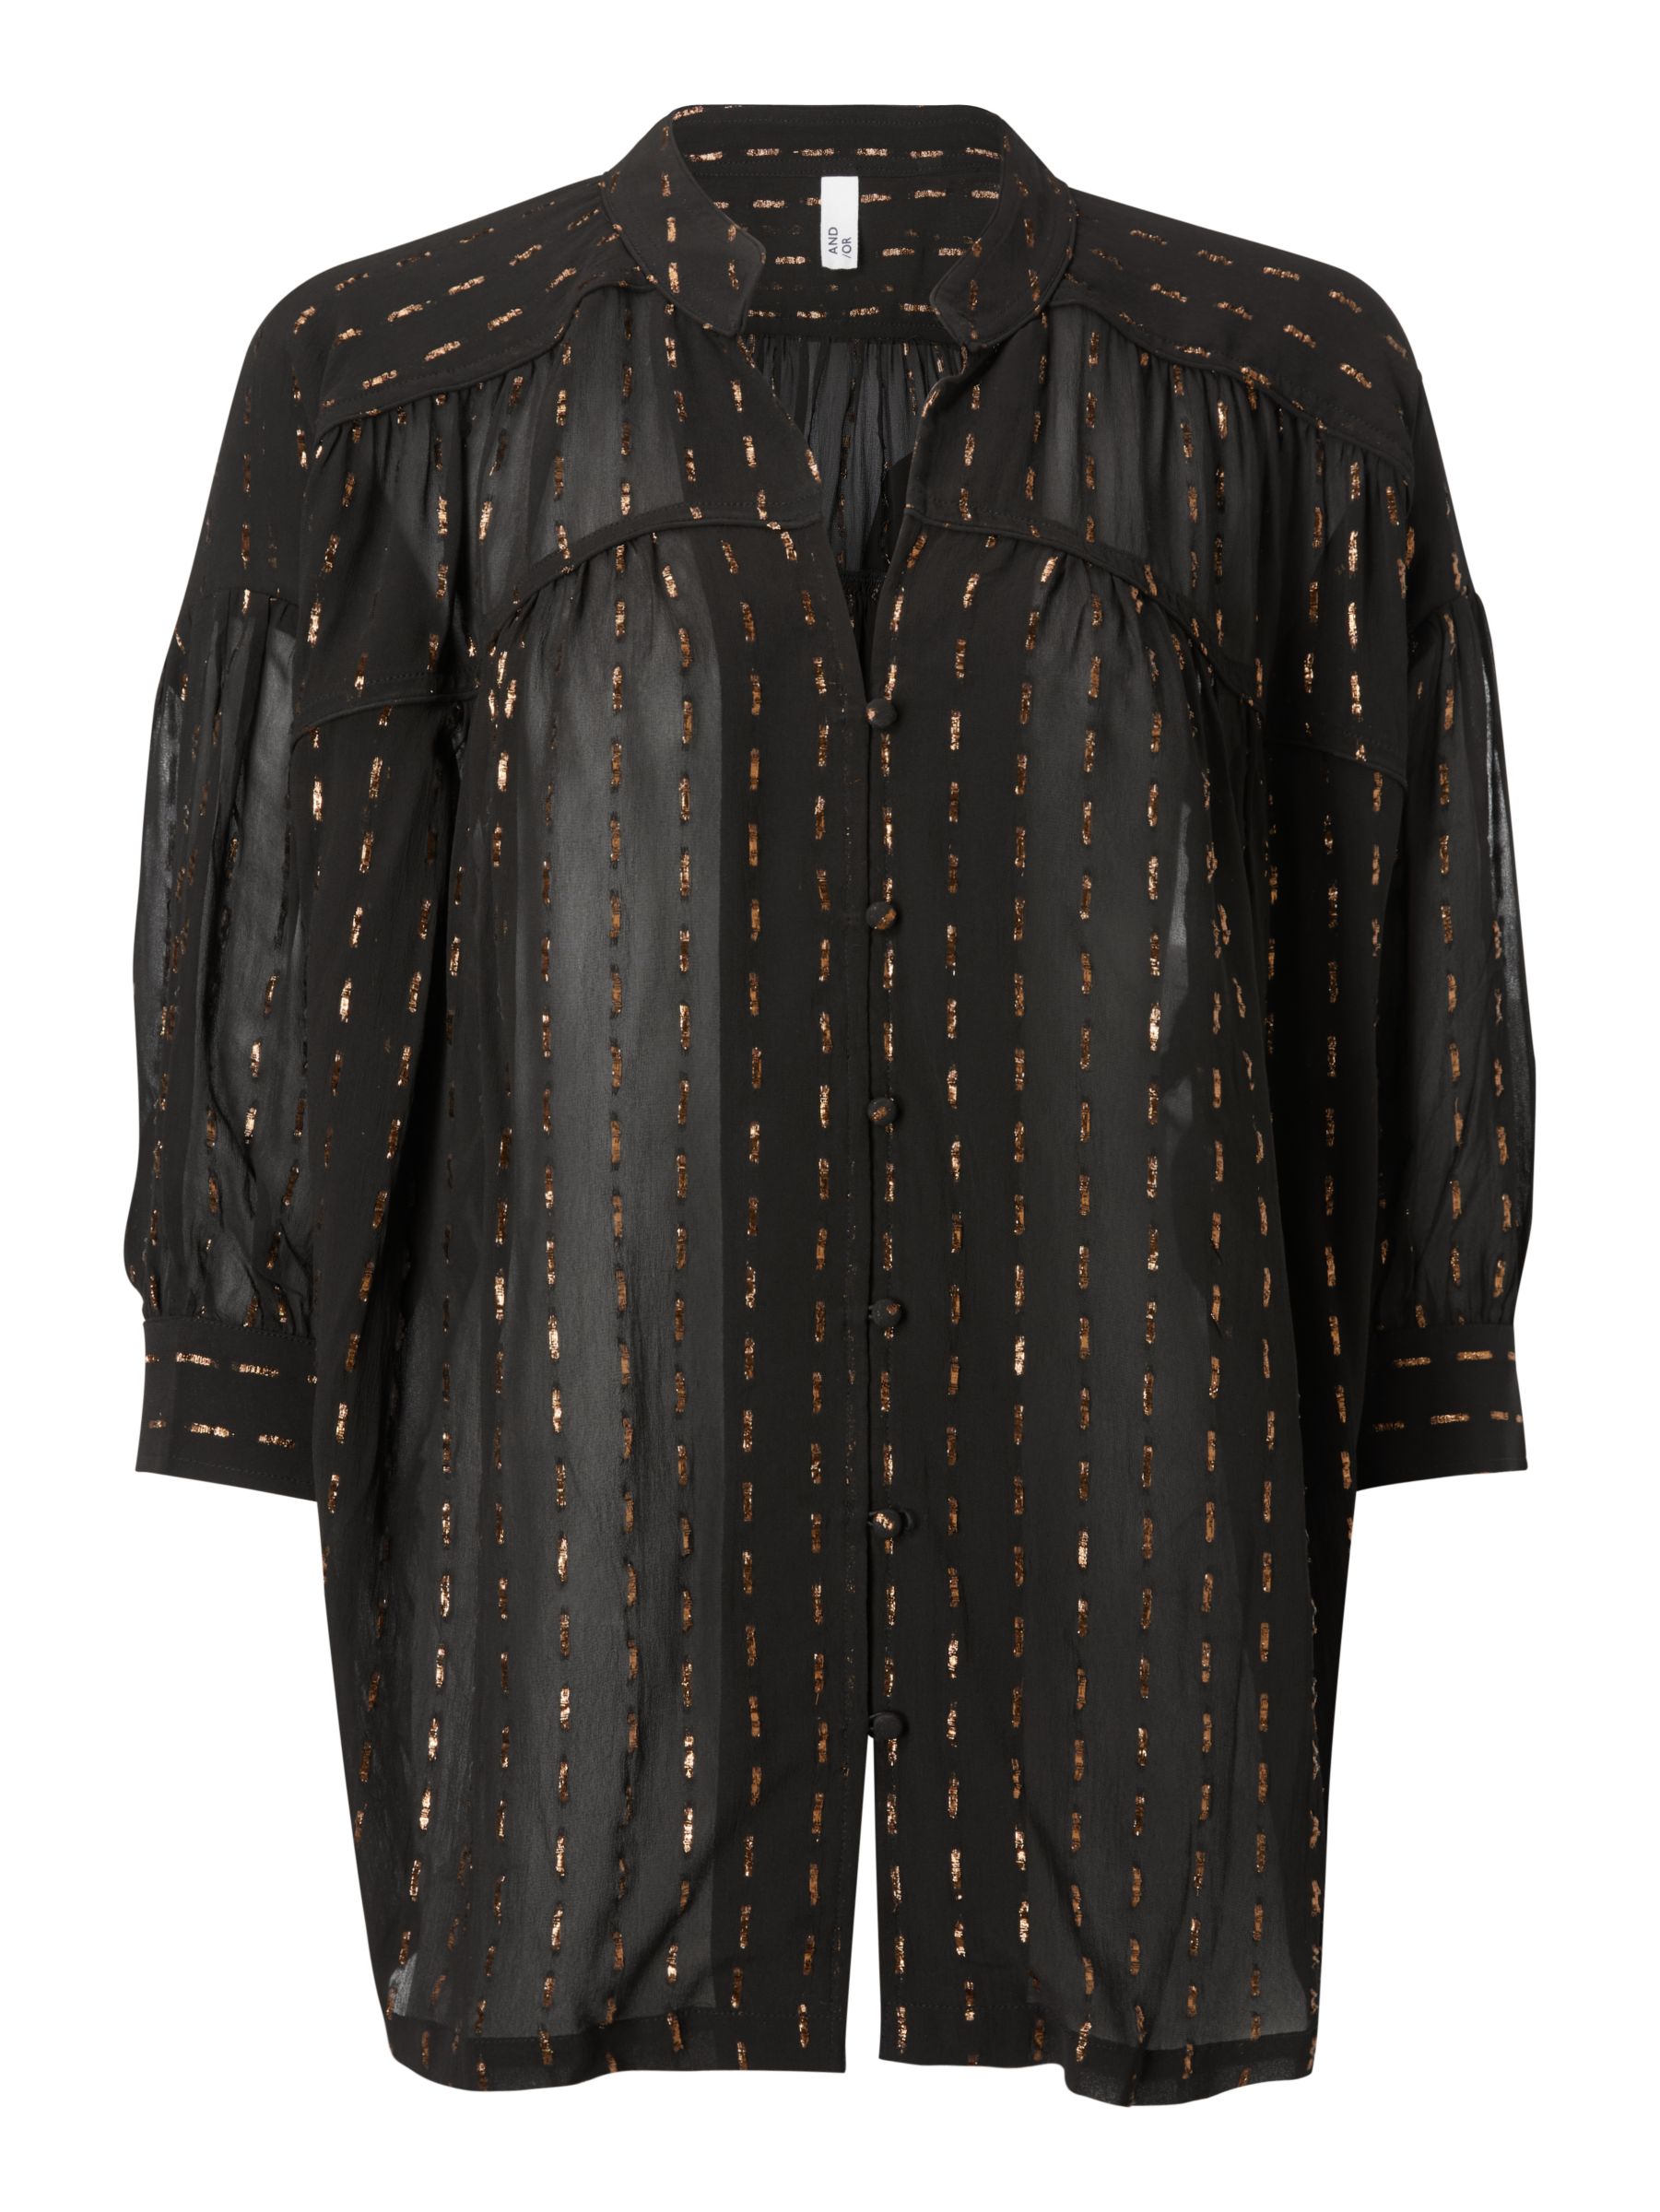 AND/OR Dash Lurex Blouse, Black/Gold